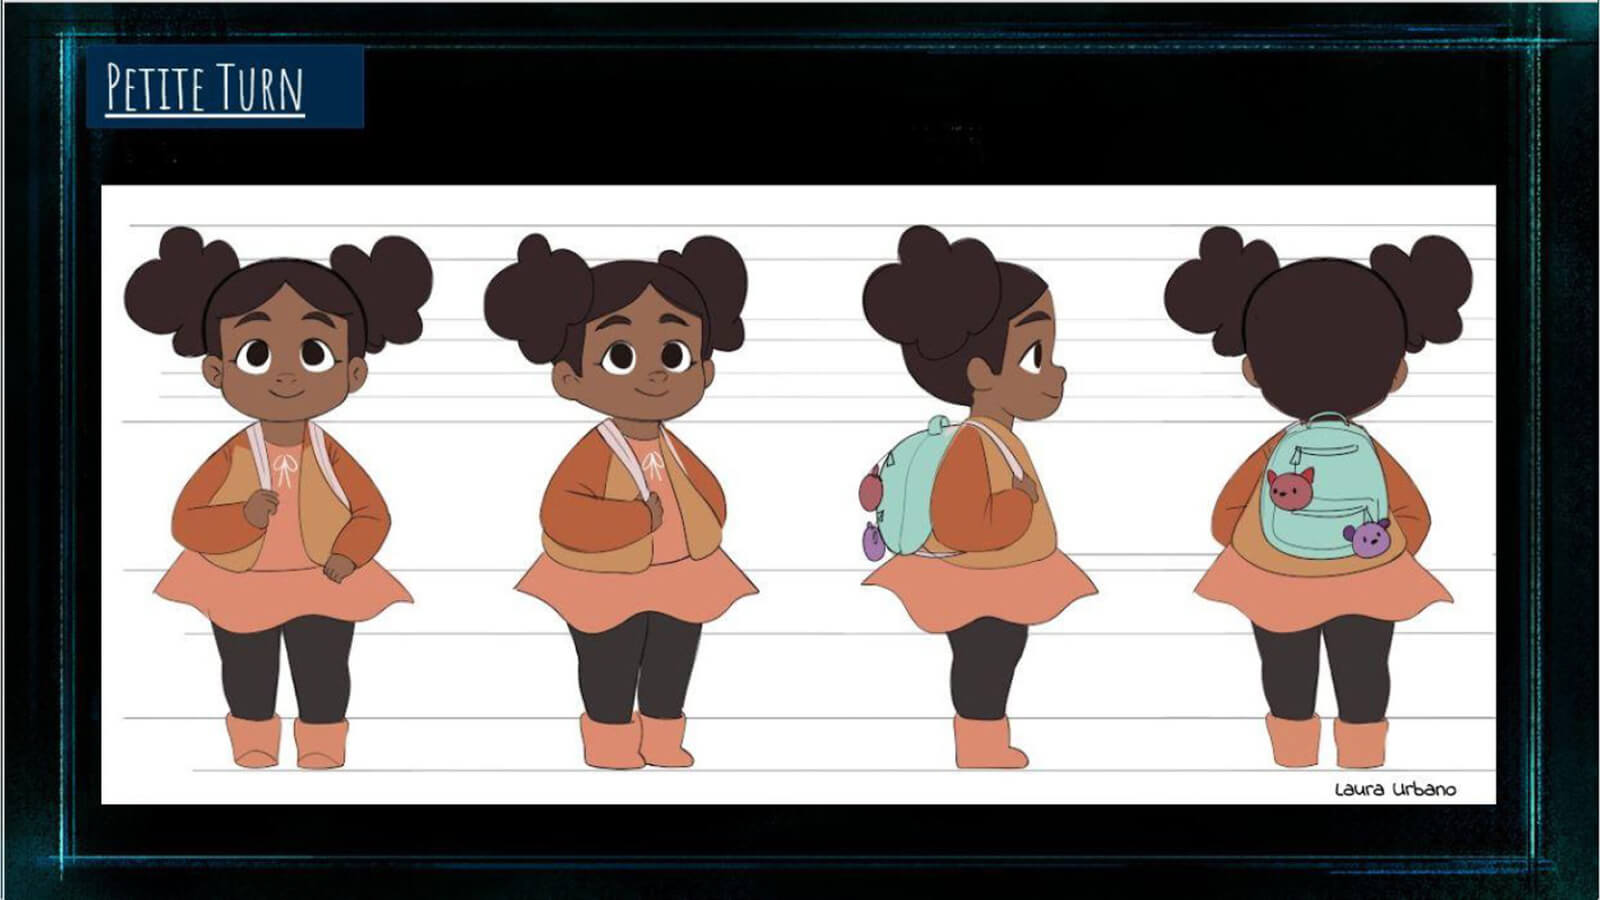 A "Character Turn" sheet for the film's character "Petite," showing her from a front, back, and side profile. 